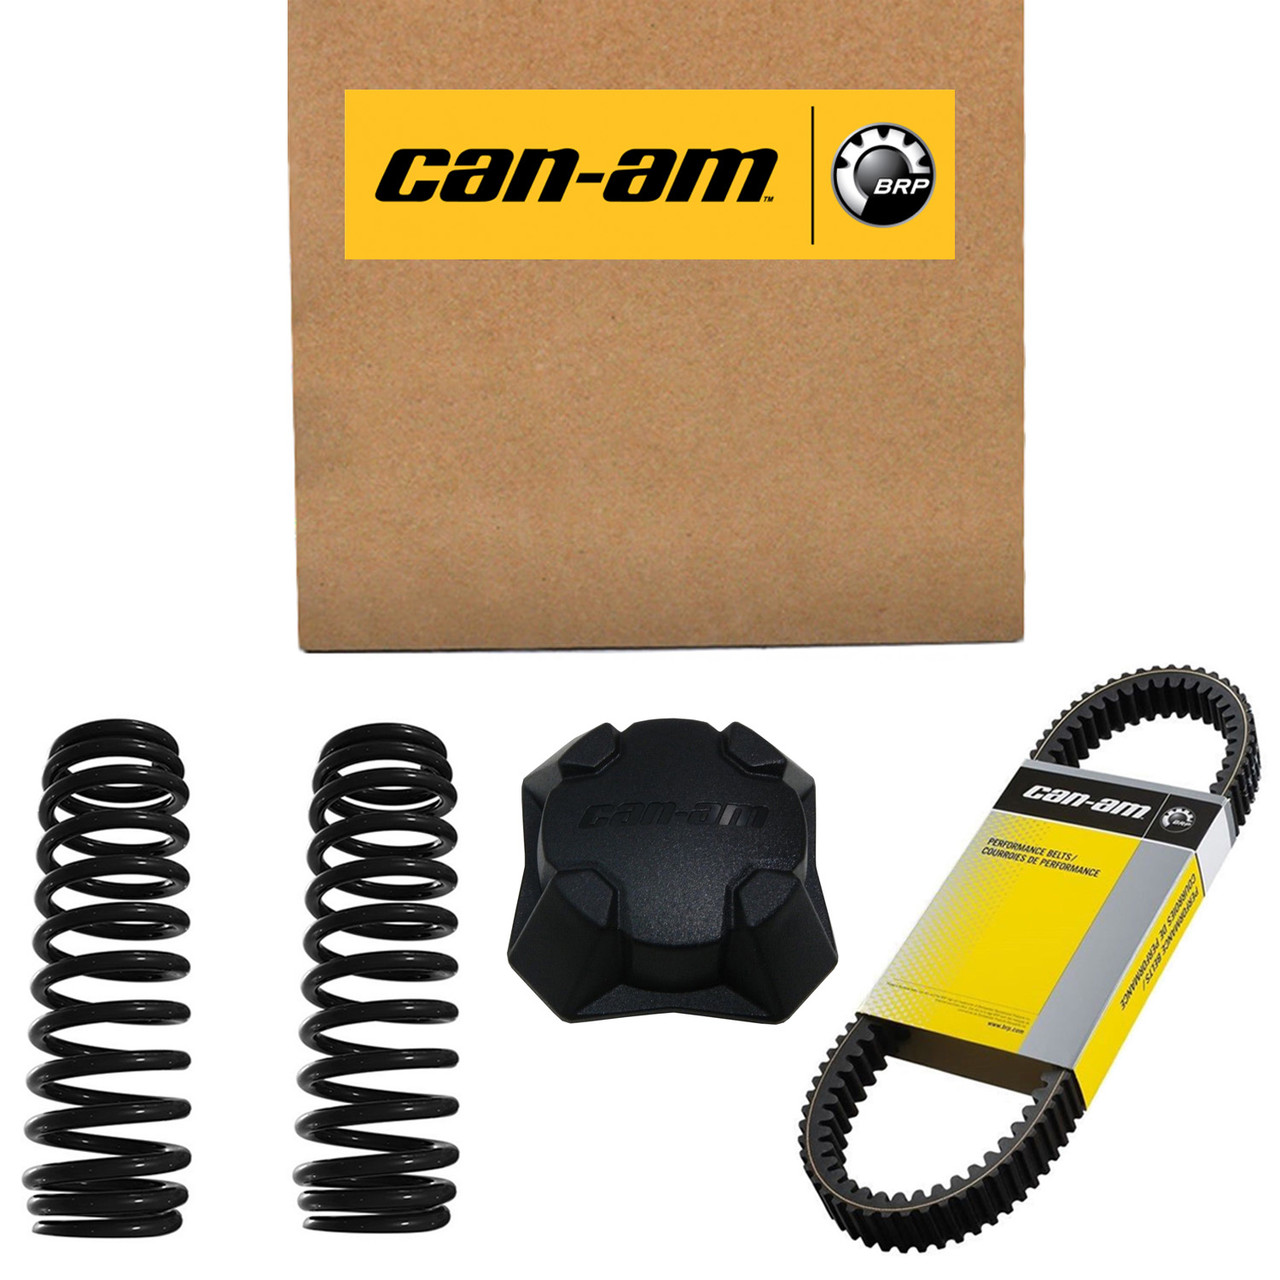 Can-Am New OEM Operator Guide English 2018, 219001924